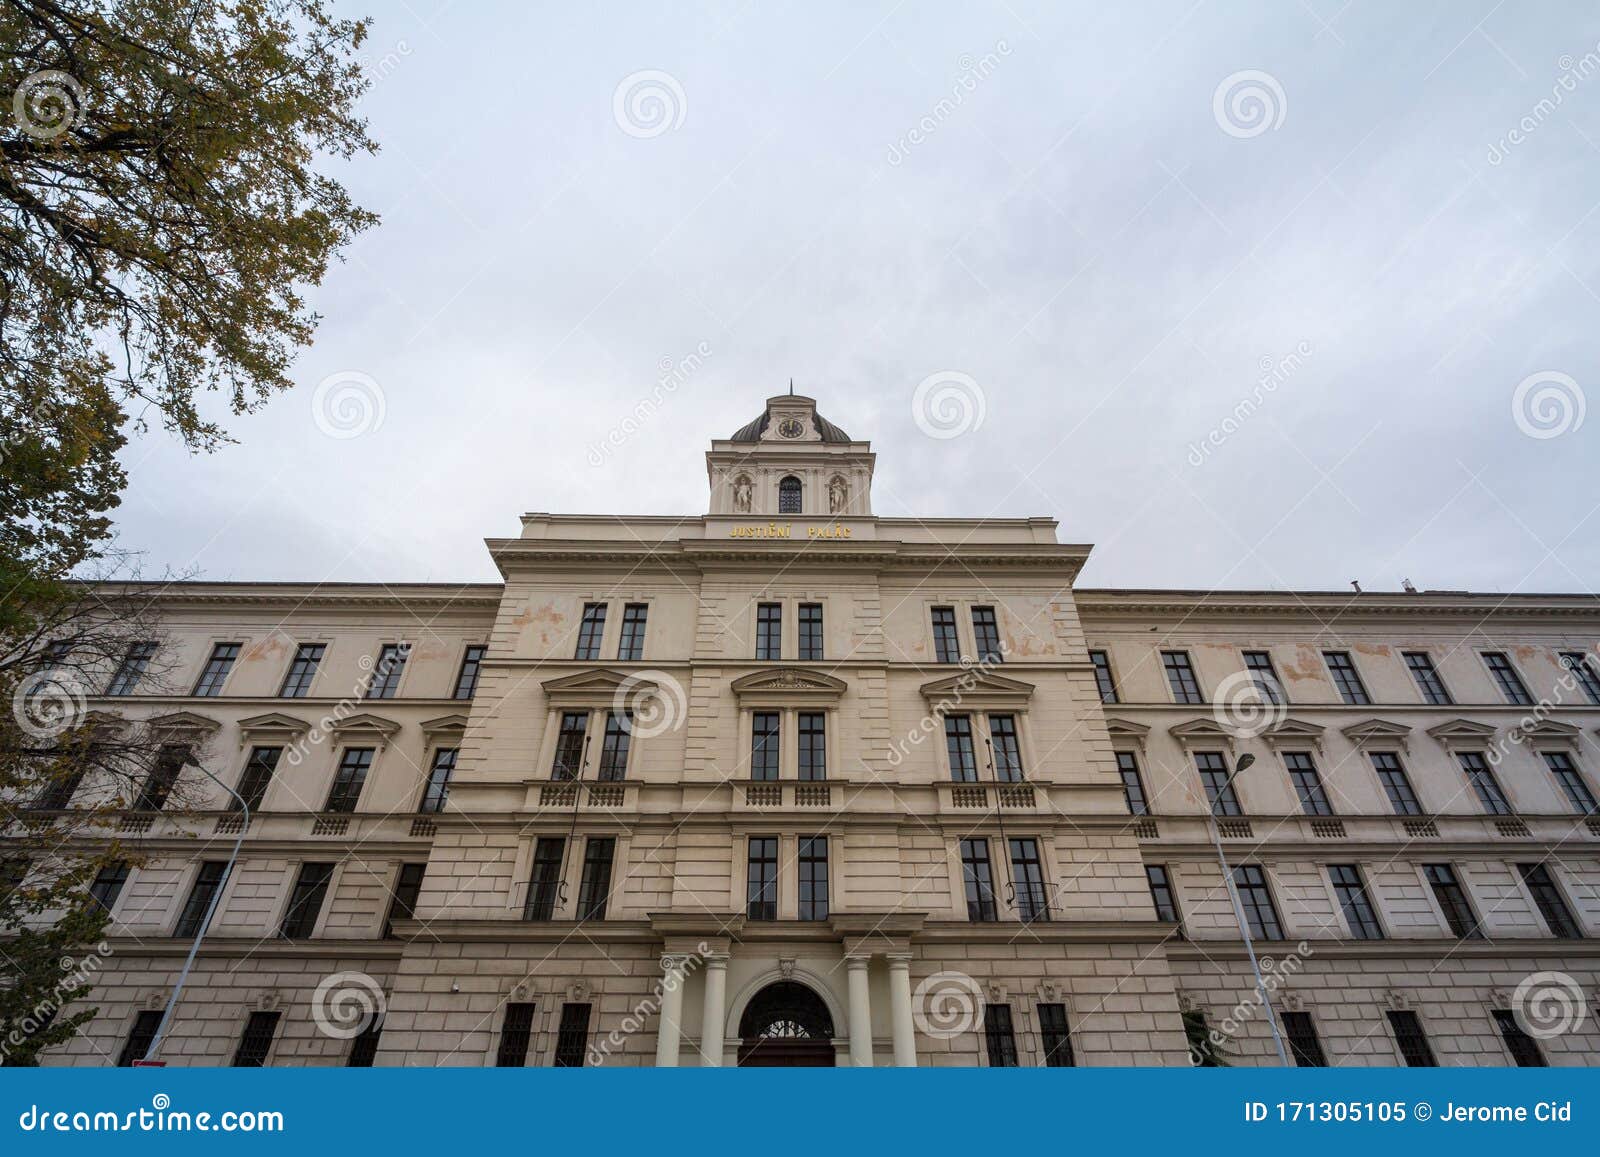 main facade of the historical building of the justice court justicni palac of prague, czech republic.